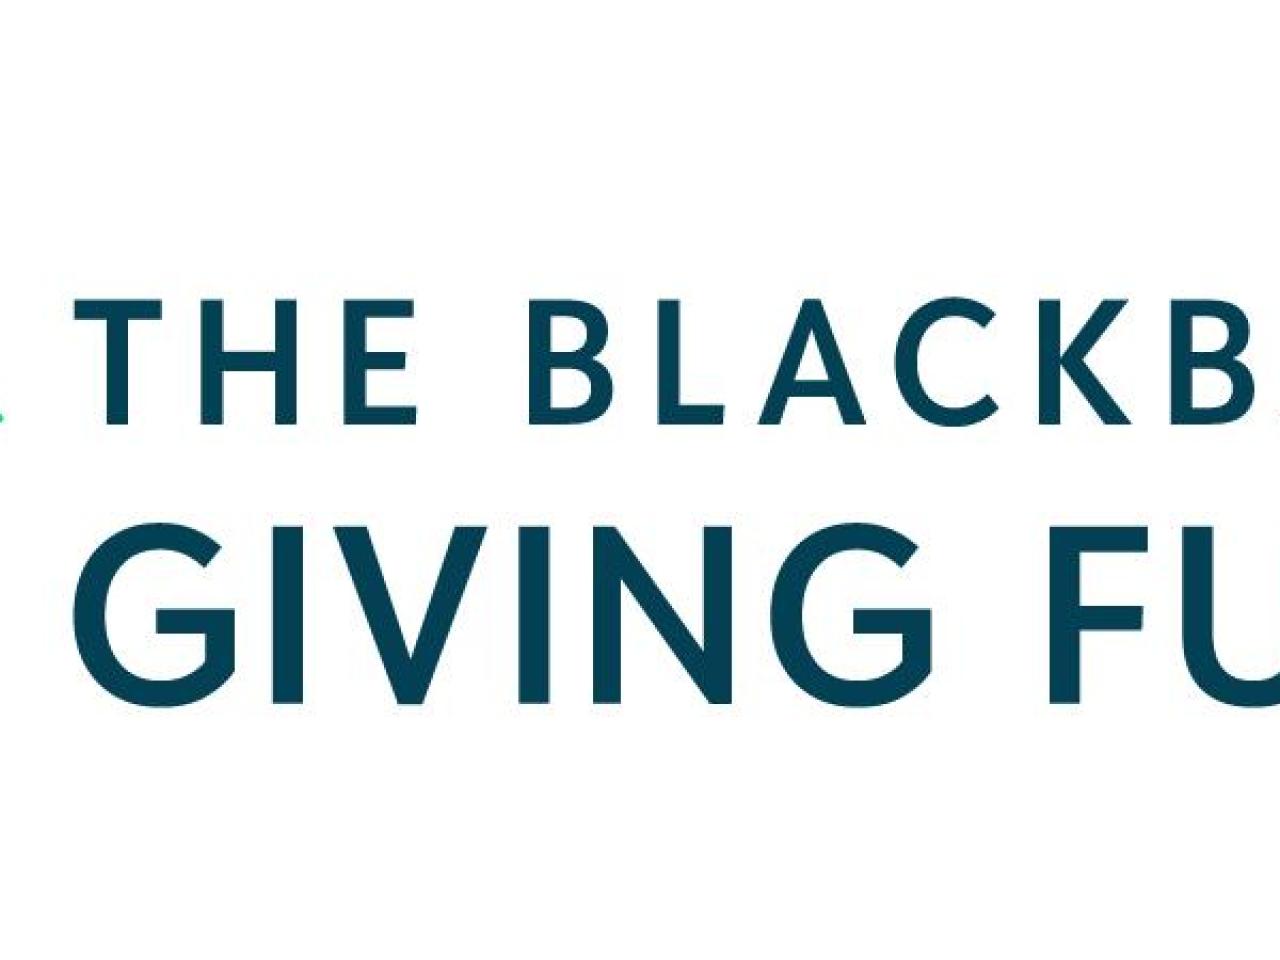 The Blackbaud Giving Fund